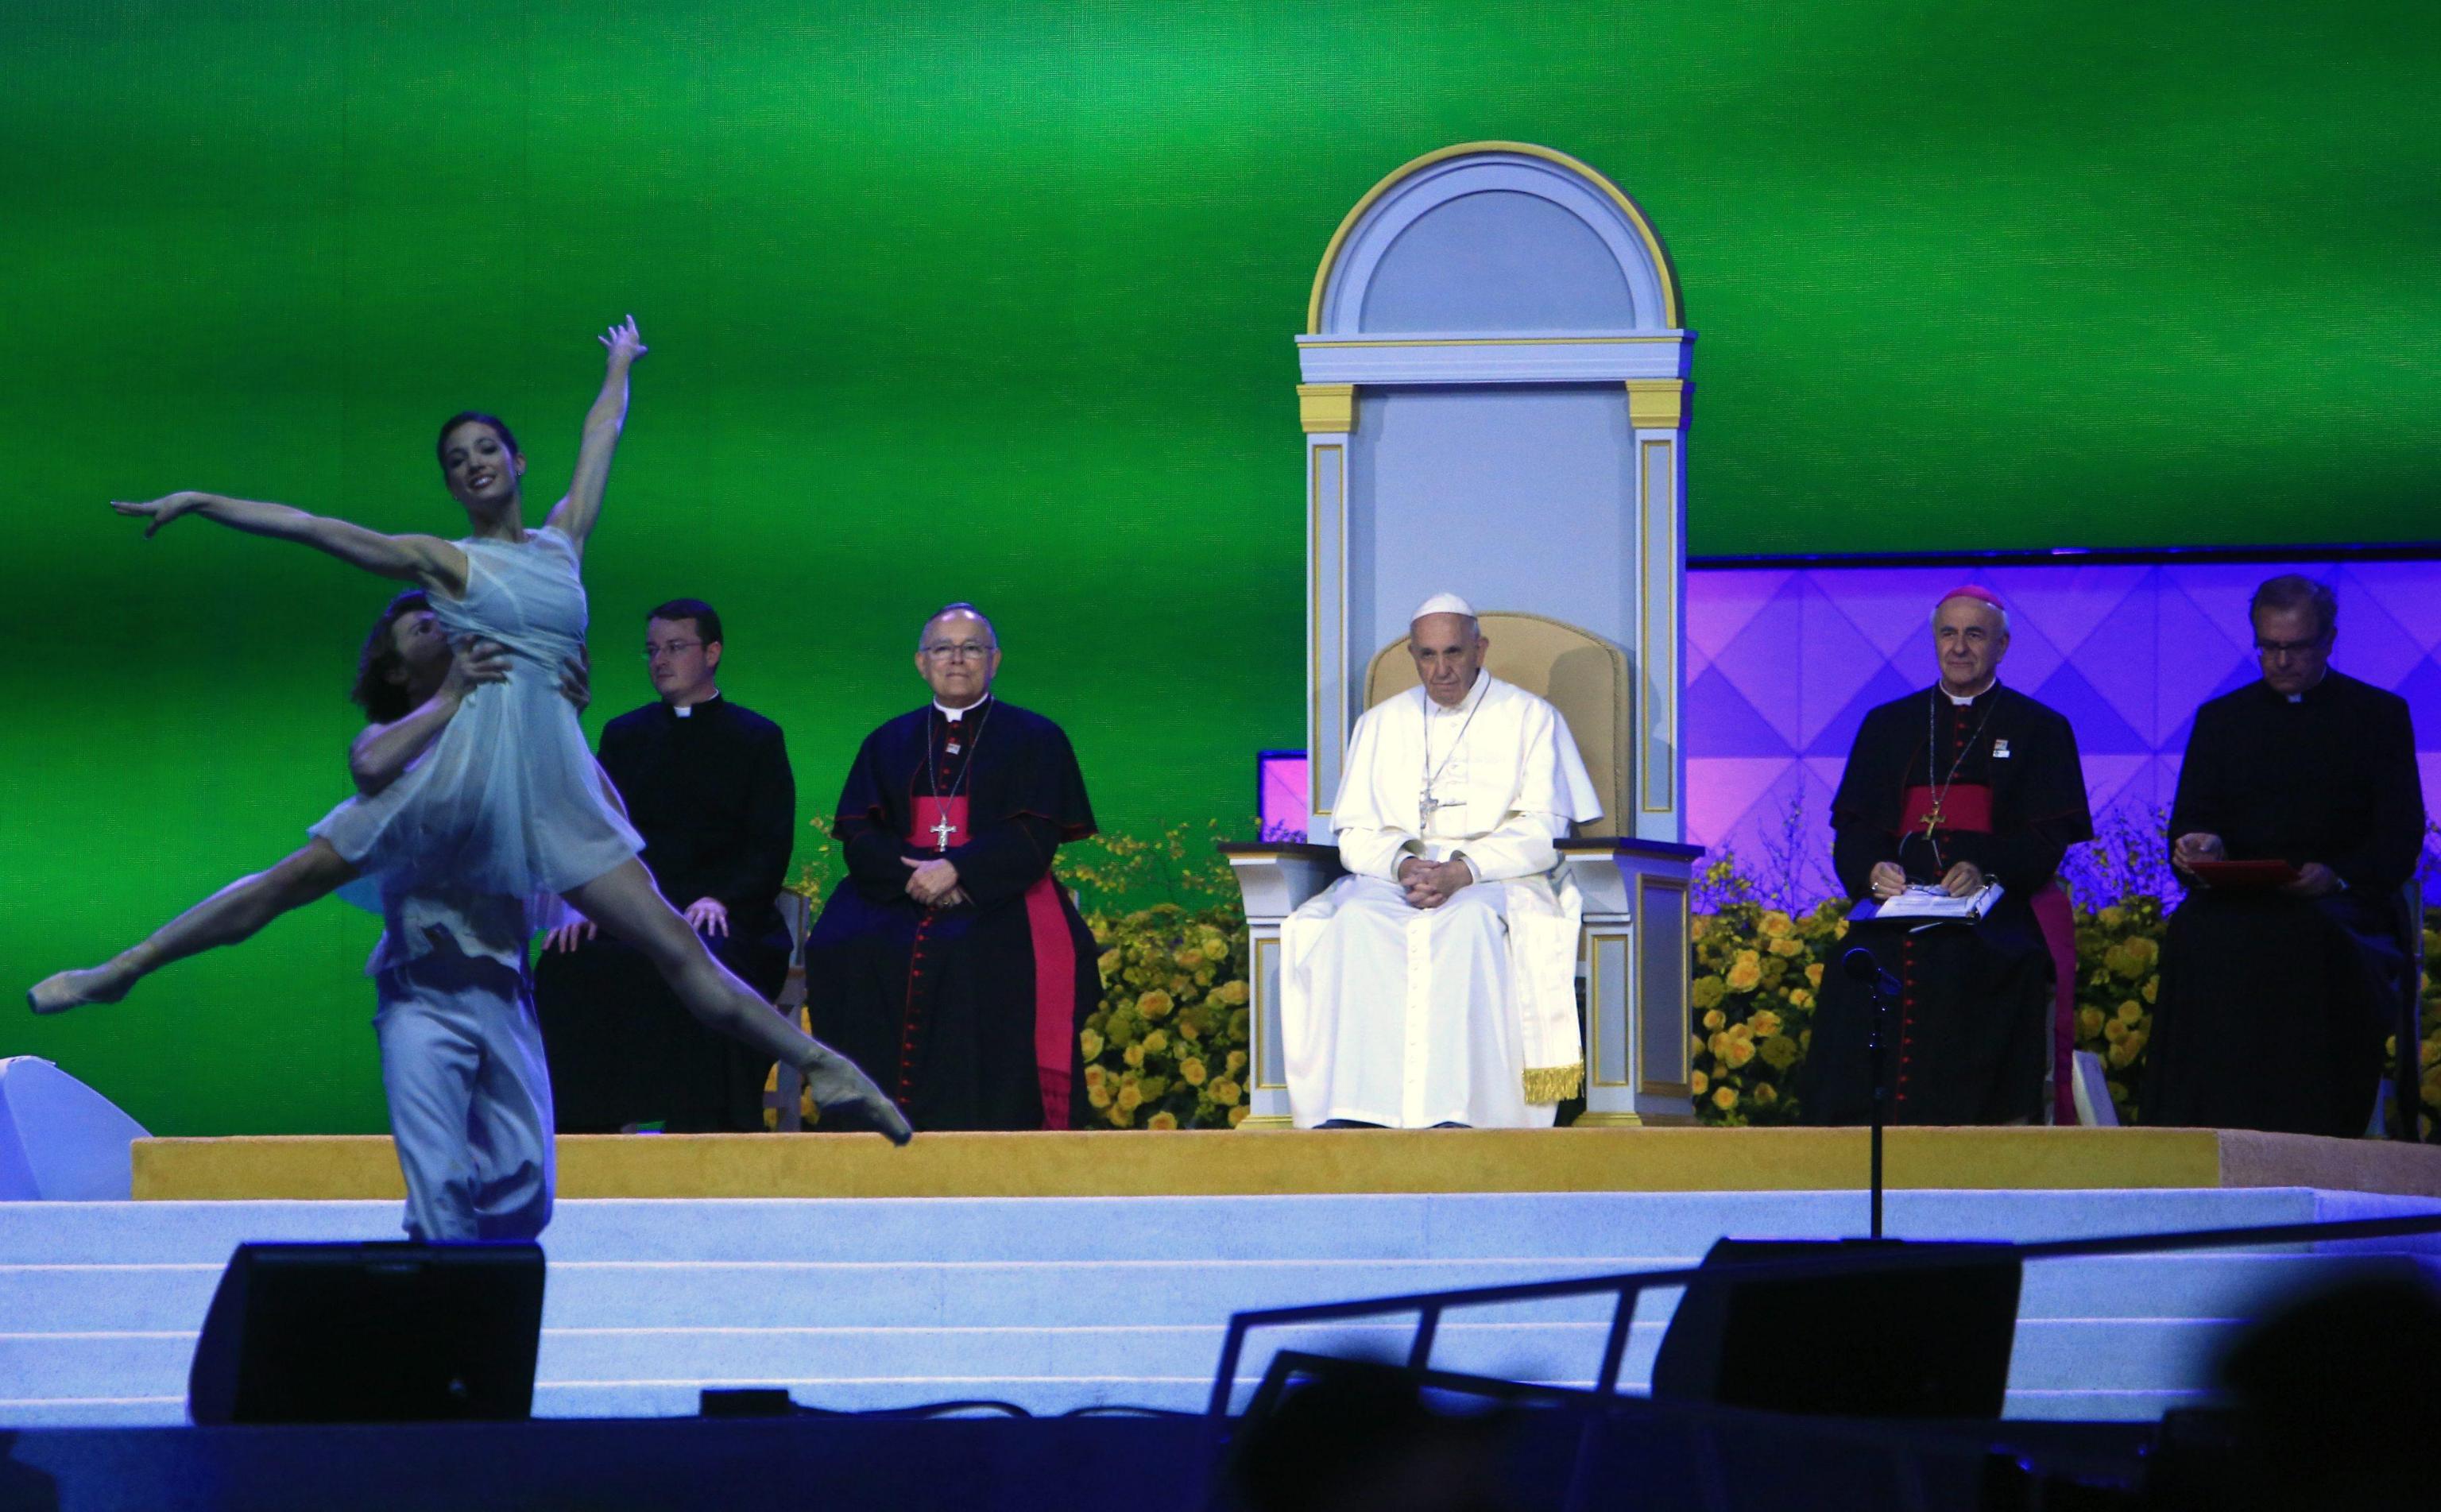 Pope Francis watches a performance as he attends the Festival of Families in Philadelphia